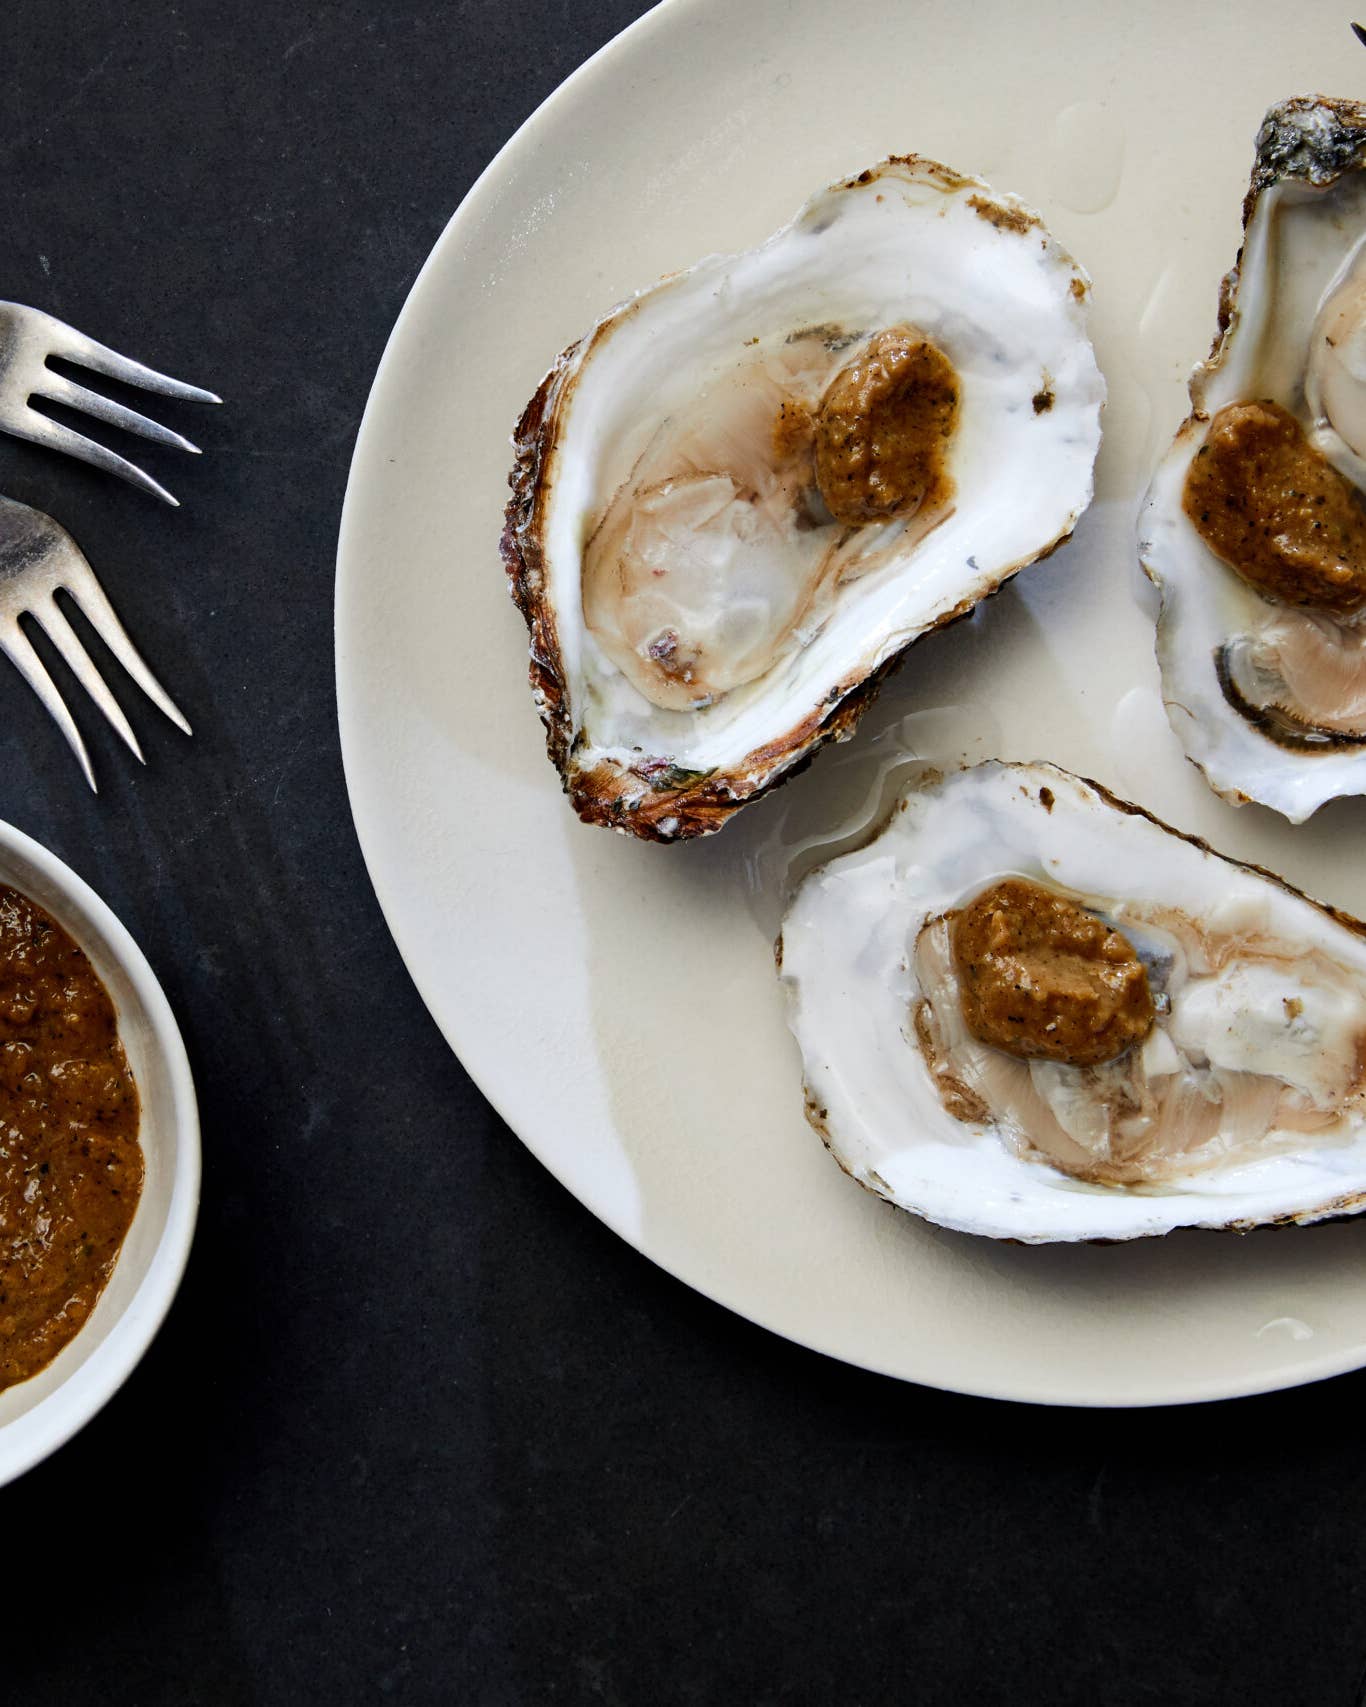 Oysters with Griddled Lemon “Curd”